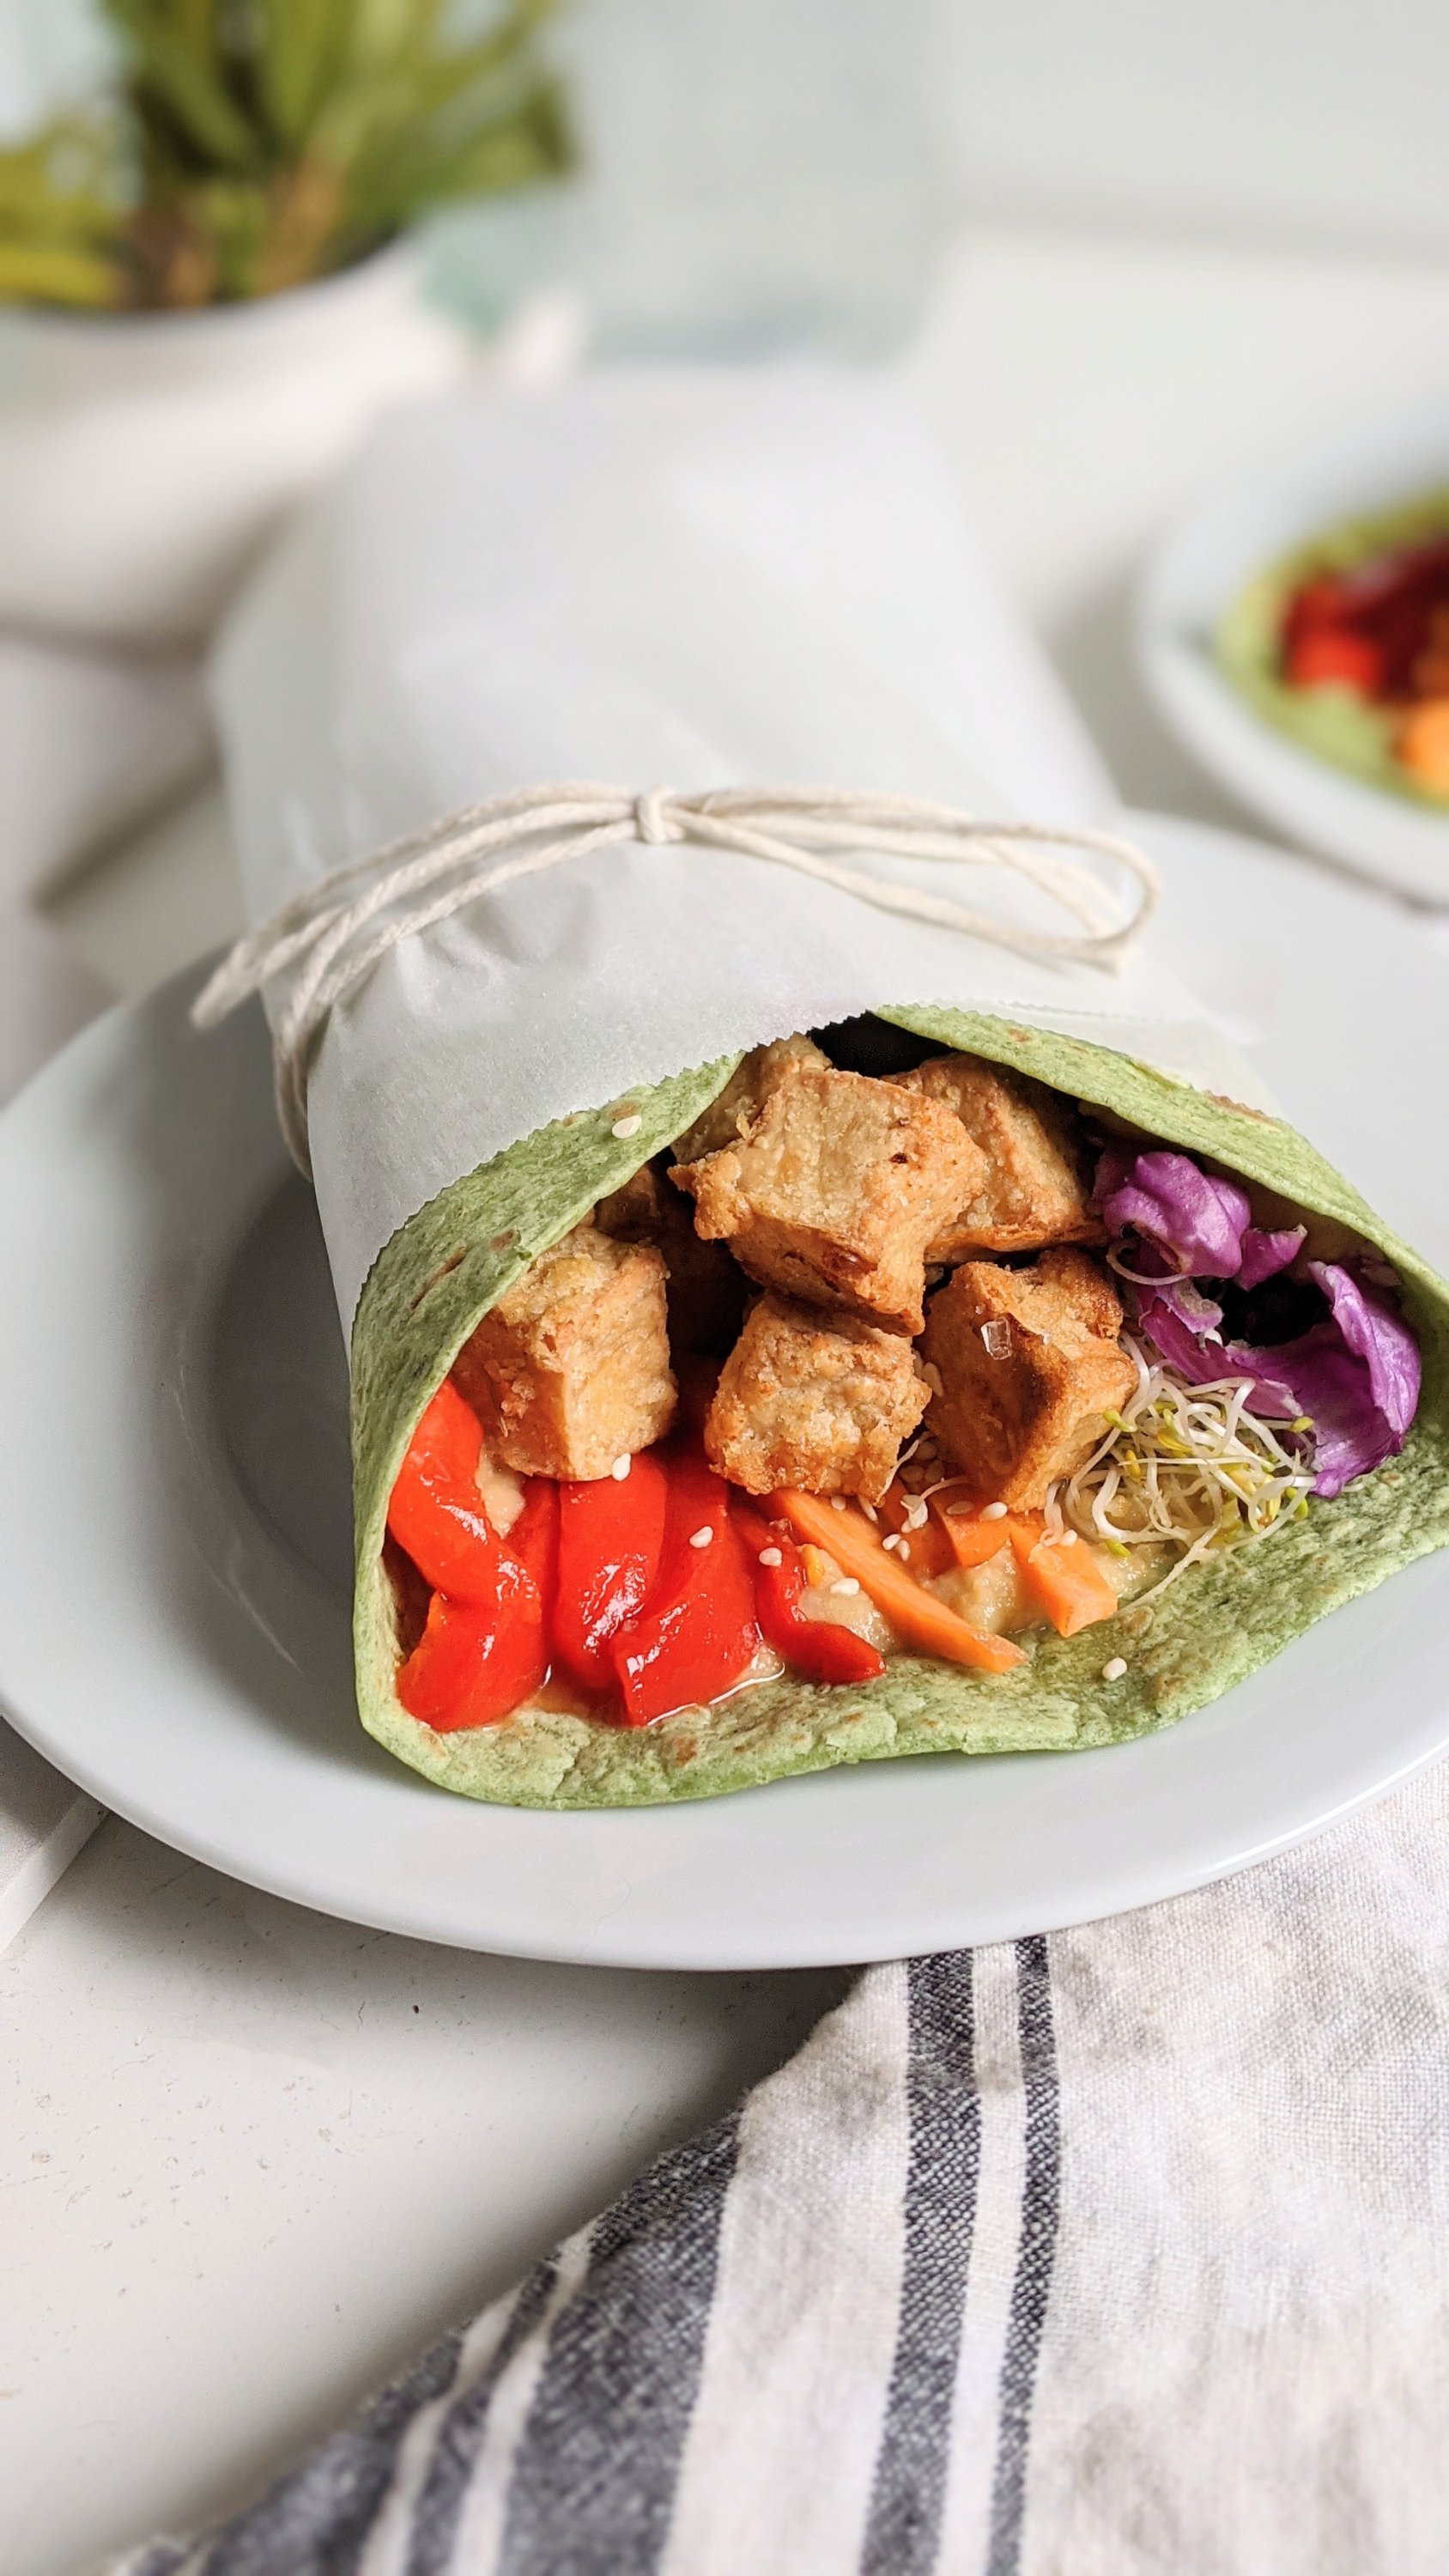 gluten free sandwich wraps high protein vegan wraps sandwiches punches dinners light and filling meal ideas vegetarian plant based healthy gluten free meatless tofu recipes with tahini sesame paste vegetables hummus